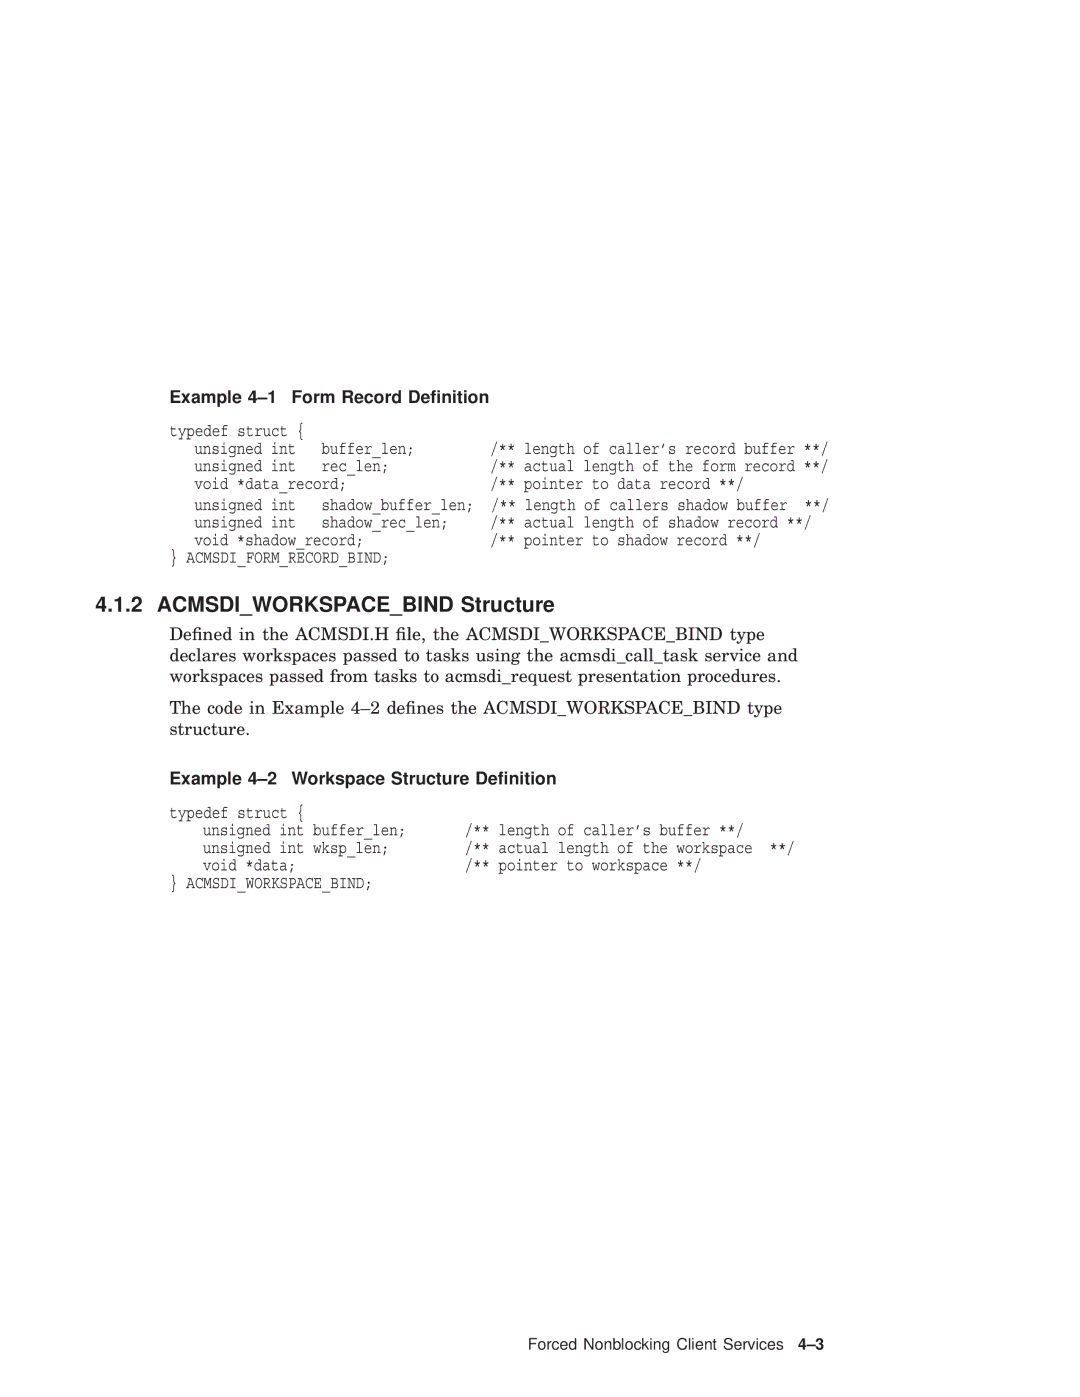 Compaq AAPVNFGTE manual Example 4-1 Form Record Deﬁnition, Example 4-2 Workspace Structure Deﬁnition 